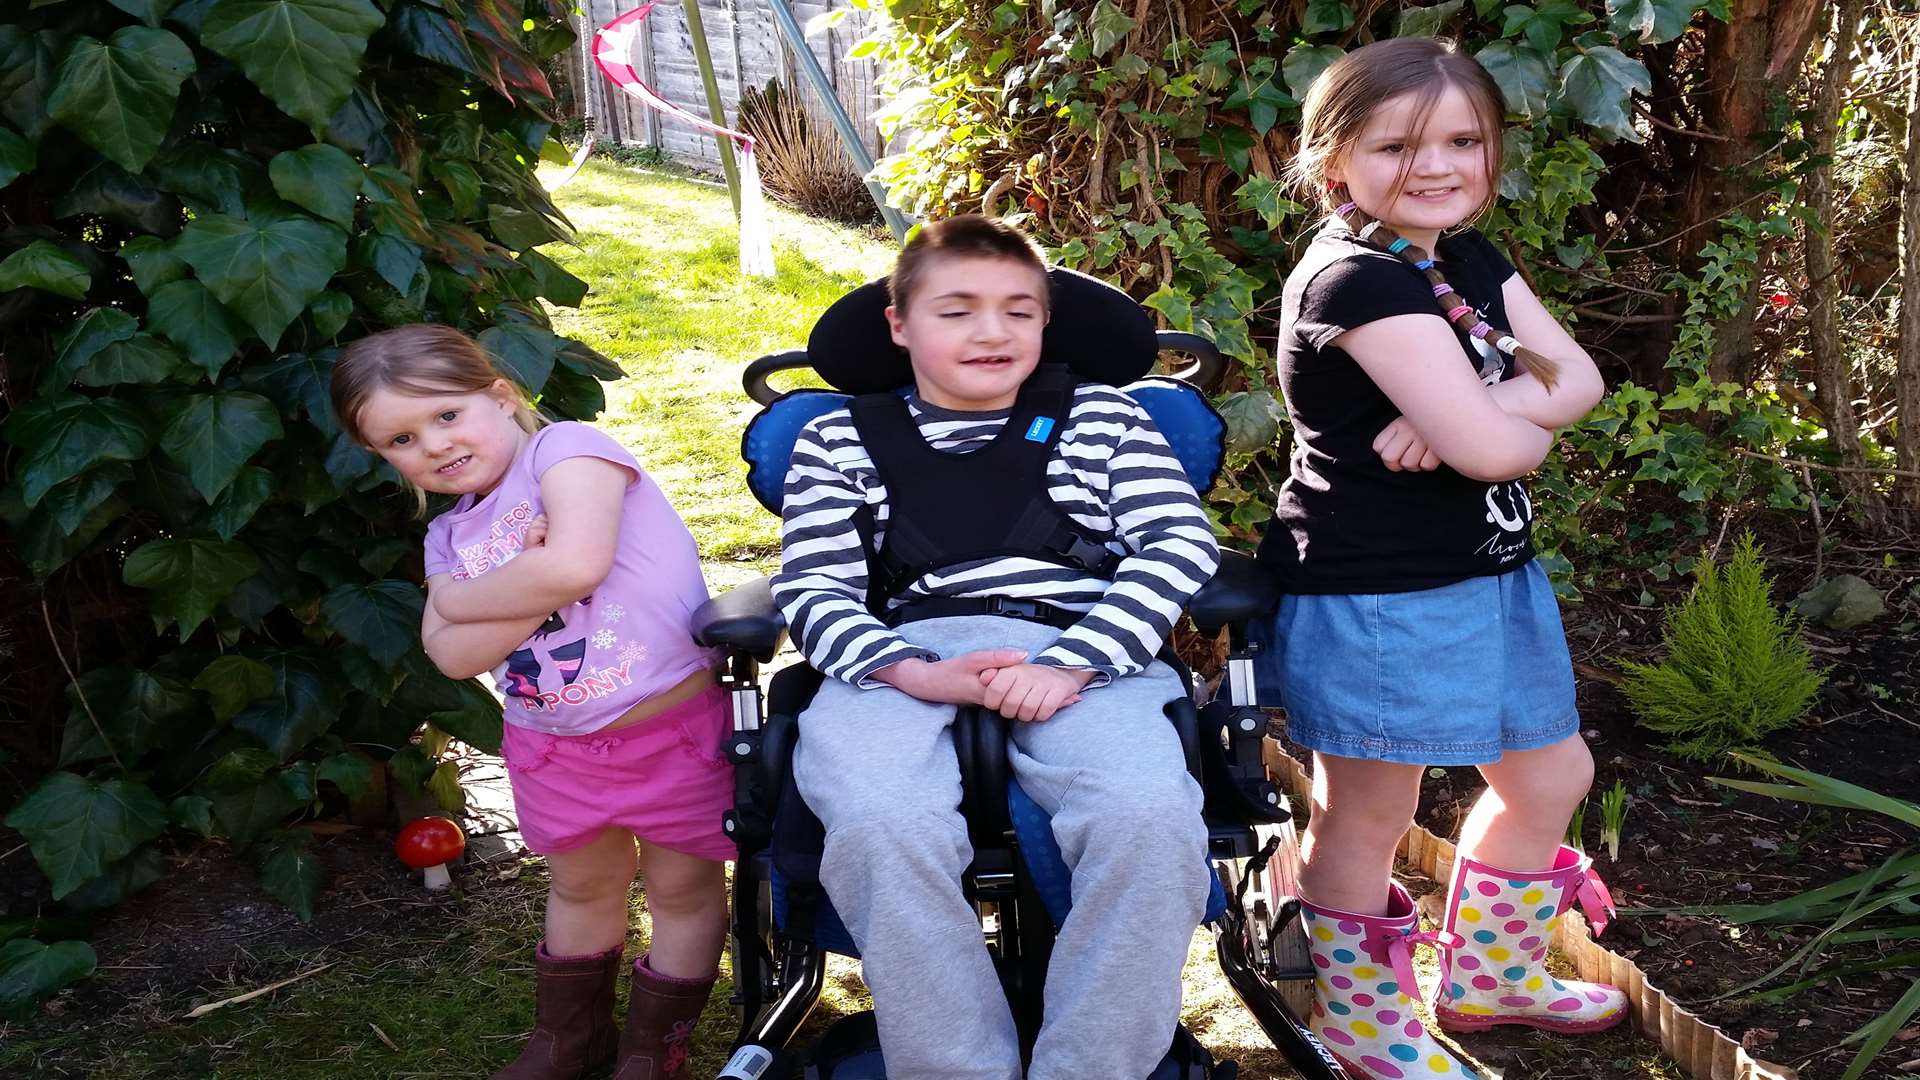 Zac Bennett, 12, started using ellenor hospice's services when he was eight. Pictured with his younger sisters Olivia (aged 9) and Ruby (aged 5)